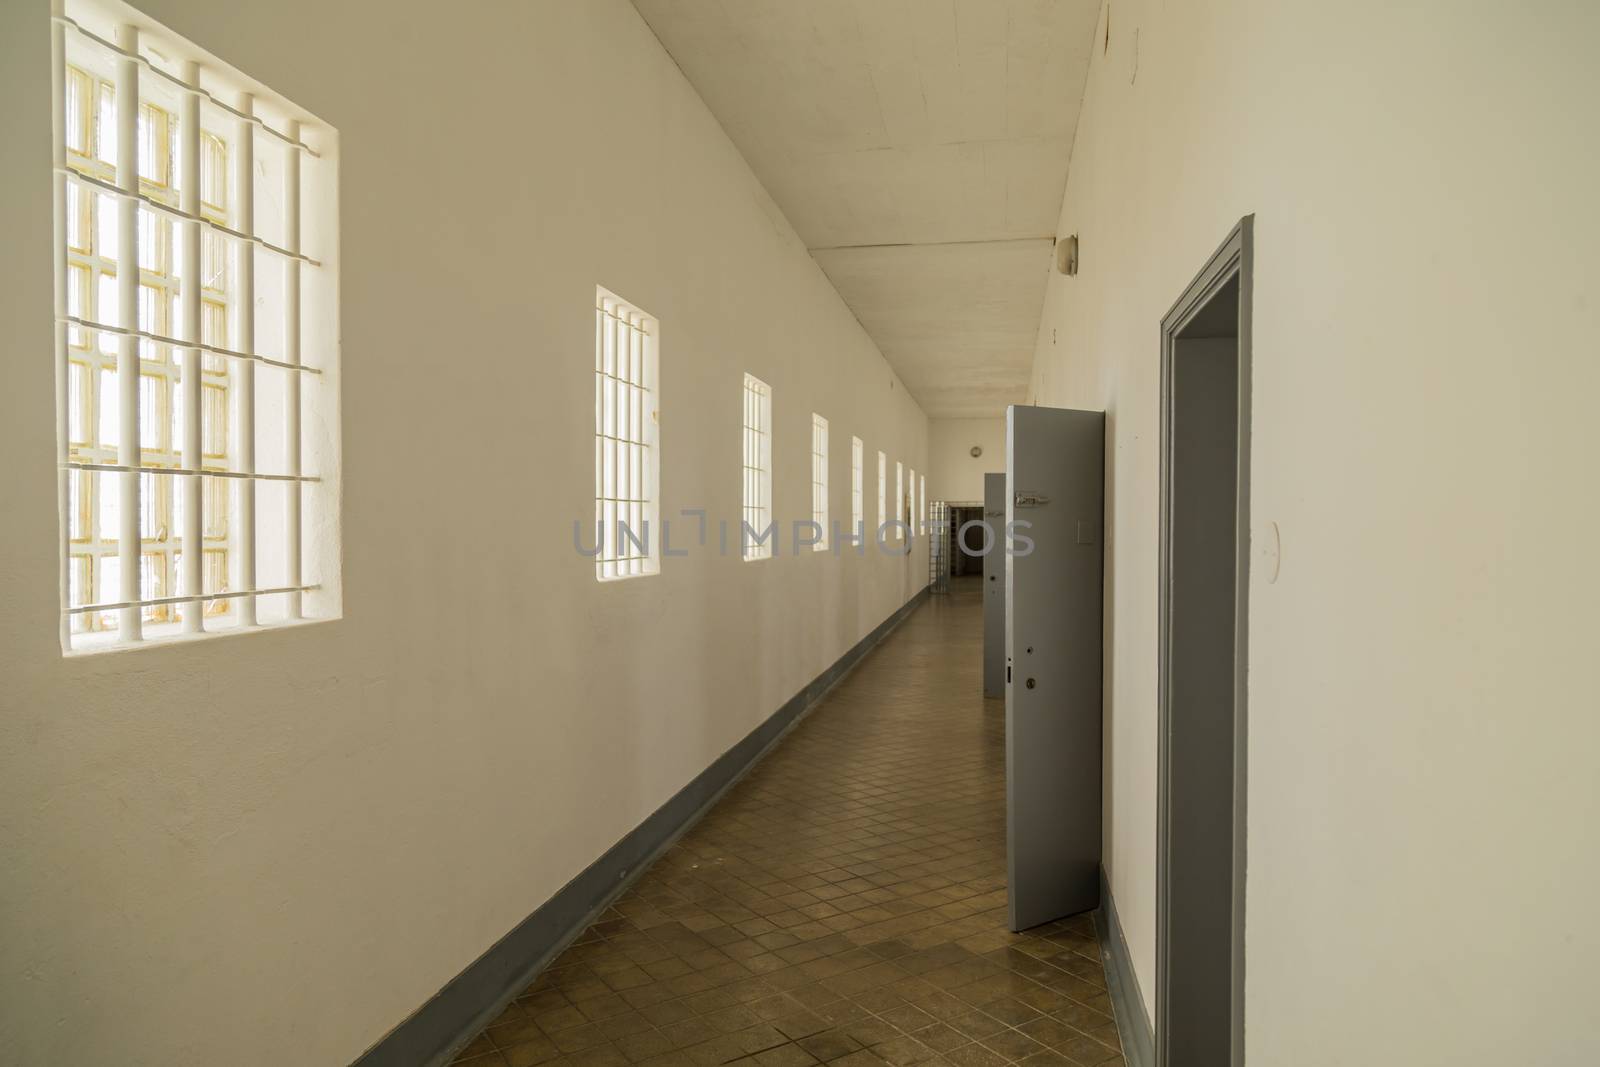 Interior view of the old political prison, within the walls of the fortress of Peniche, Portugal